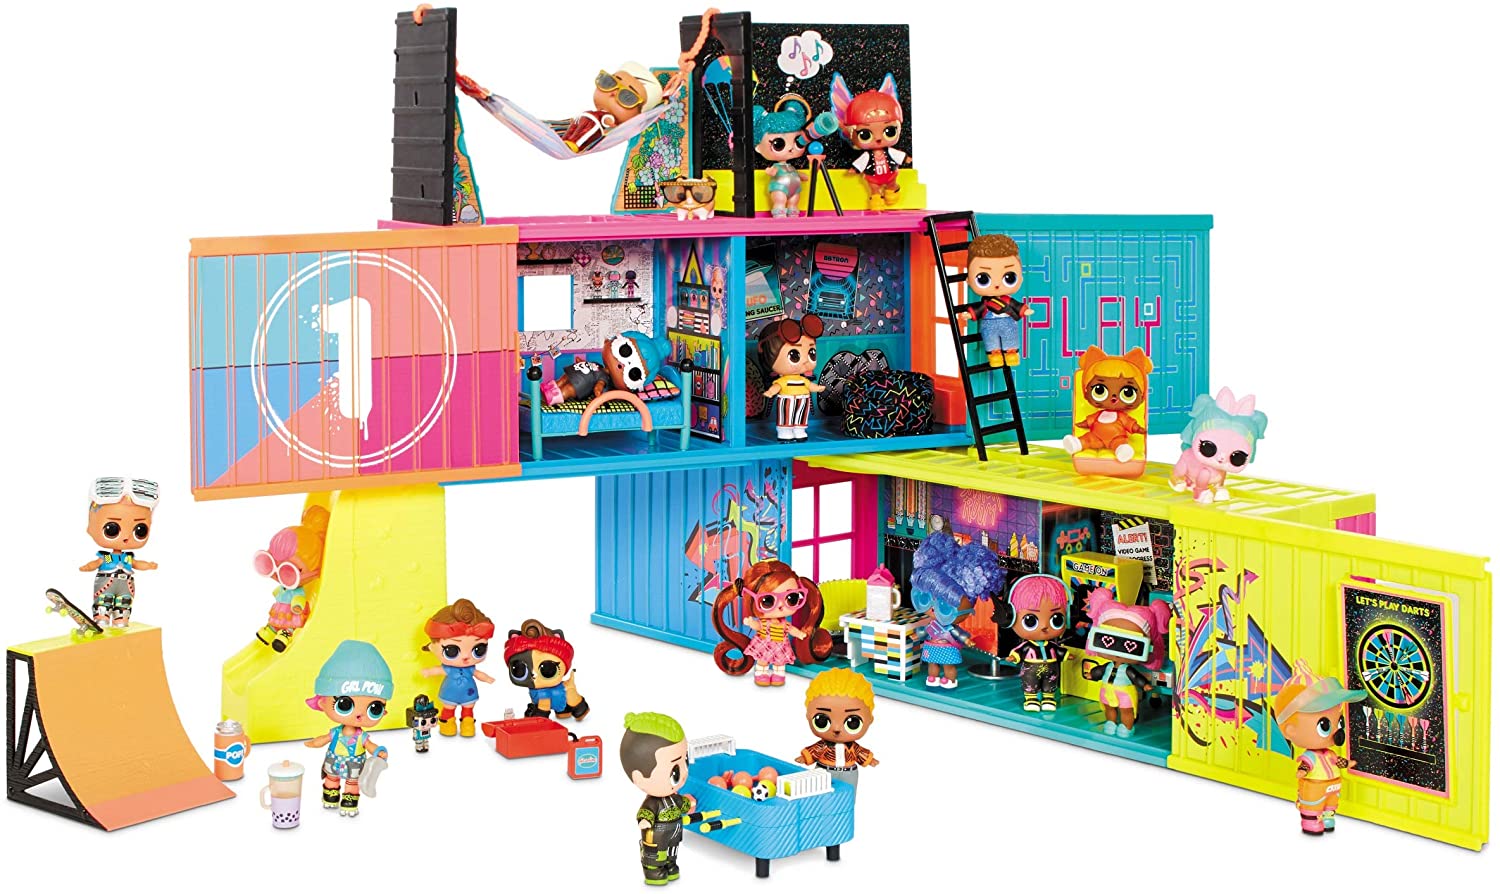 L.O.L. Surprise! Clubhouse Playset w/ 40+ Surprises & 2 Exclusives Dolls $32 + Free Shipping